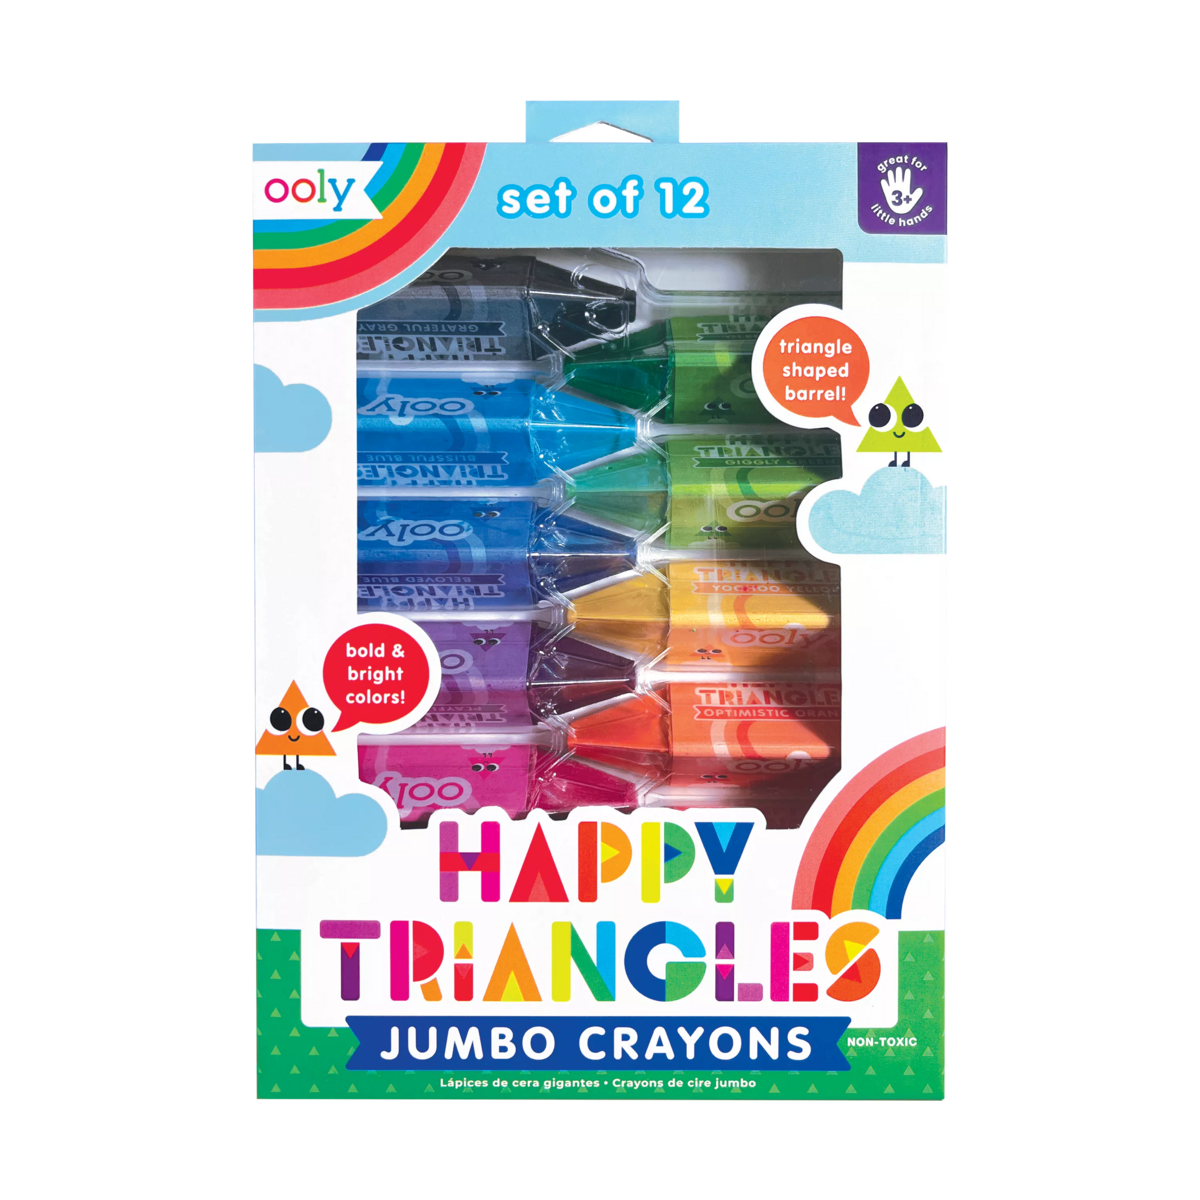 ooly Left/Right ergonomic crayons – Mudpuddles Toy Store